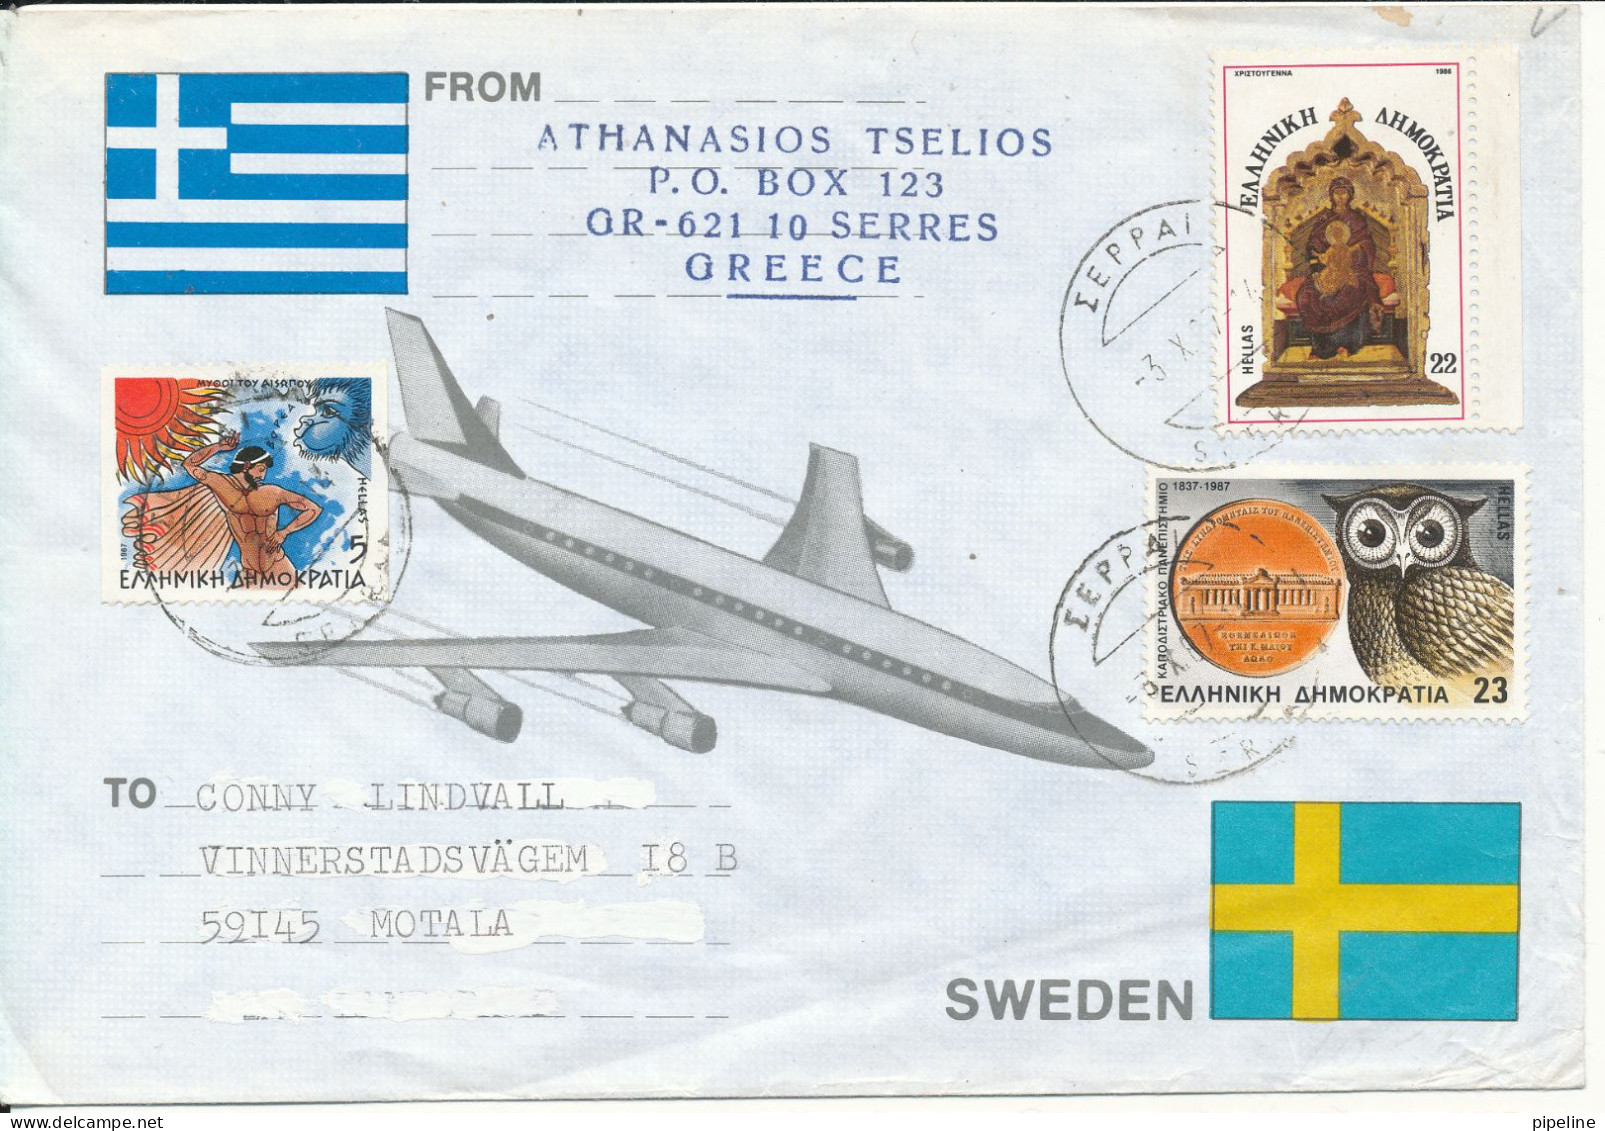 Greece Air Mail Cover Sent To Sweden 3-10-1987 See The BASKETBALL Label On The Backside Of The Cover - Monte Athos